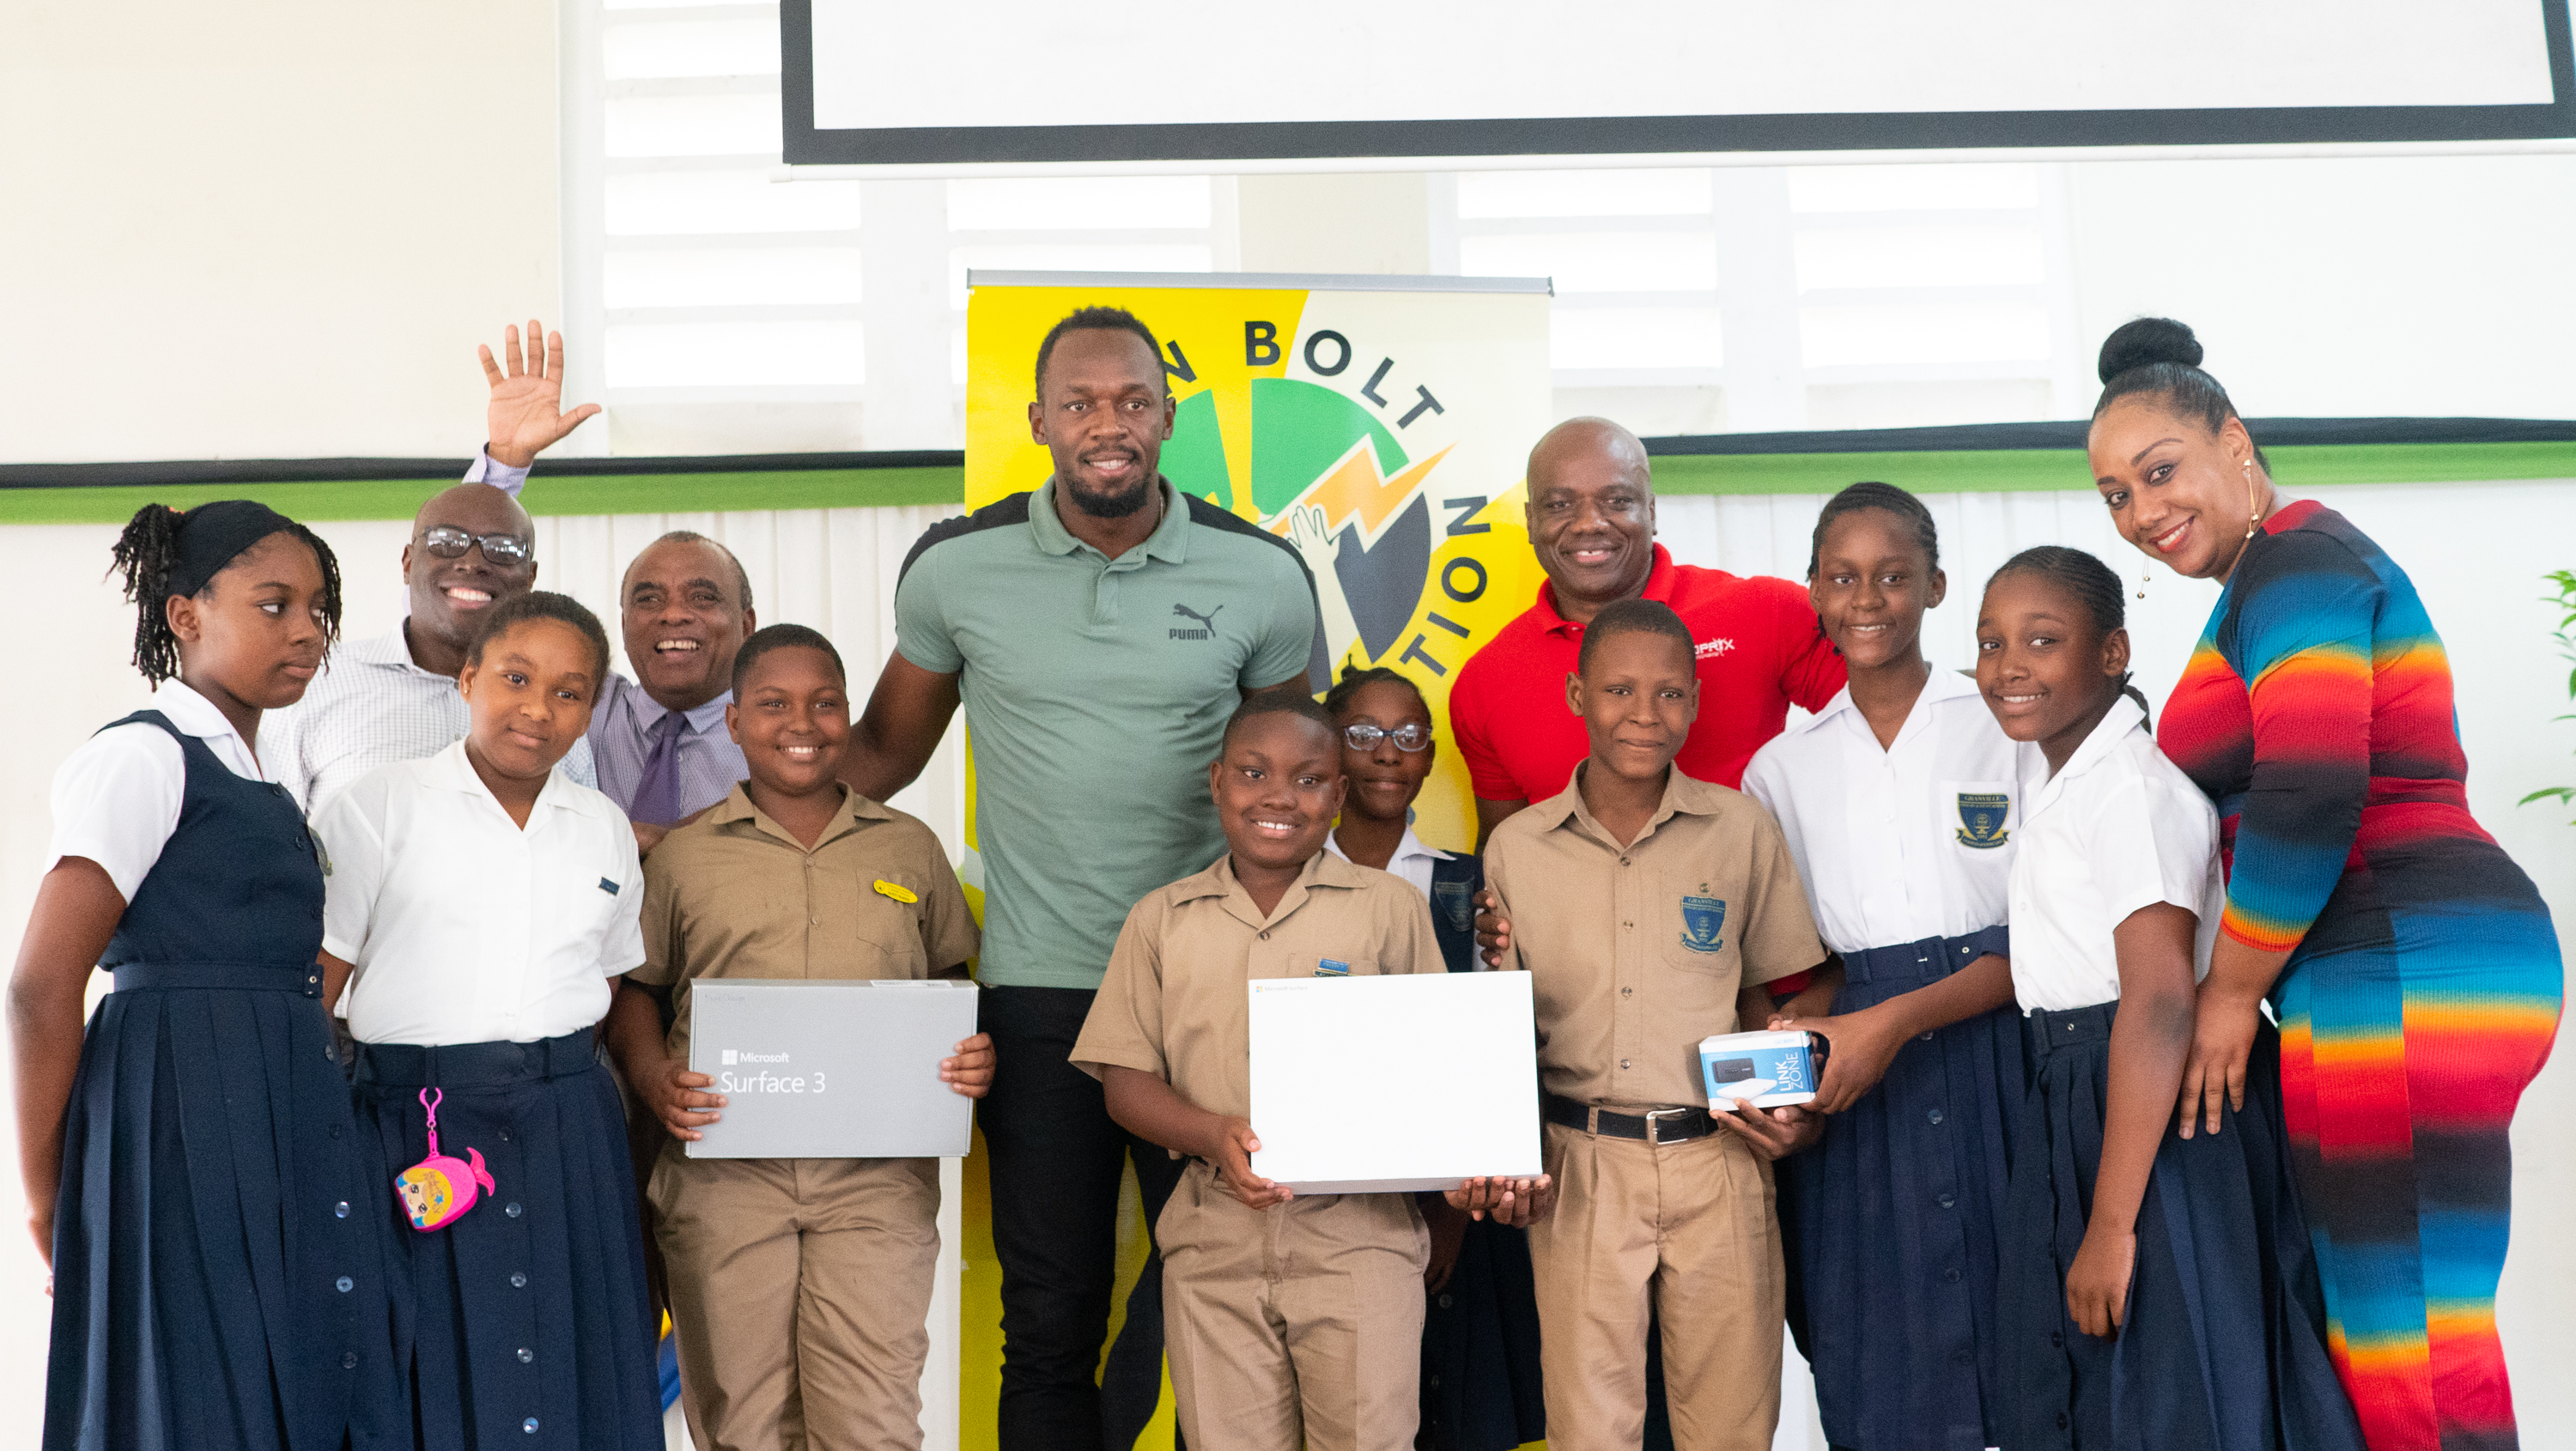 Usain Bolt Foundation refurbishes school ground and hands over computer equipment to schools in Trelawny